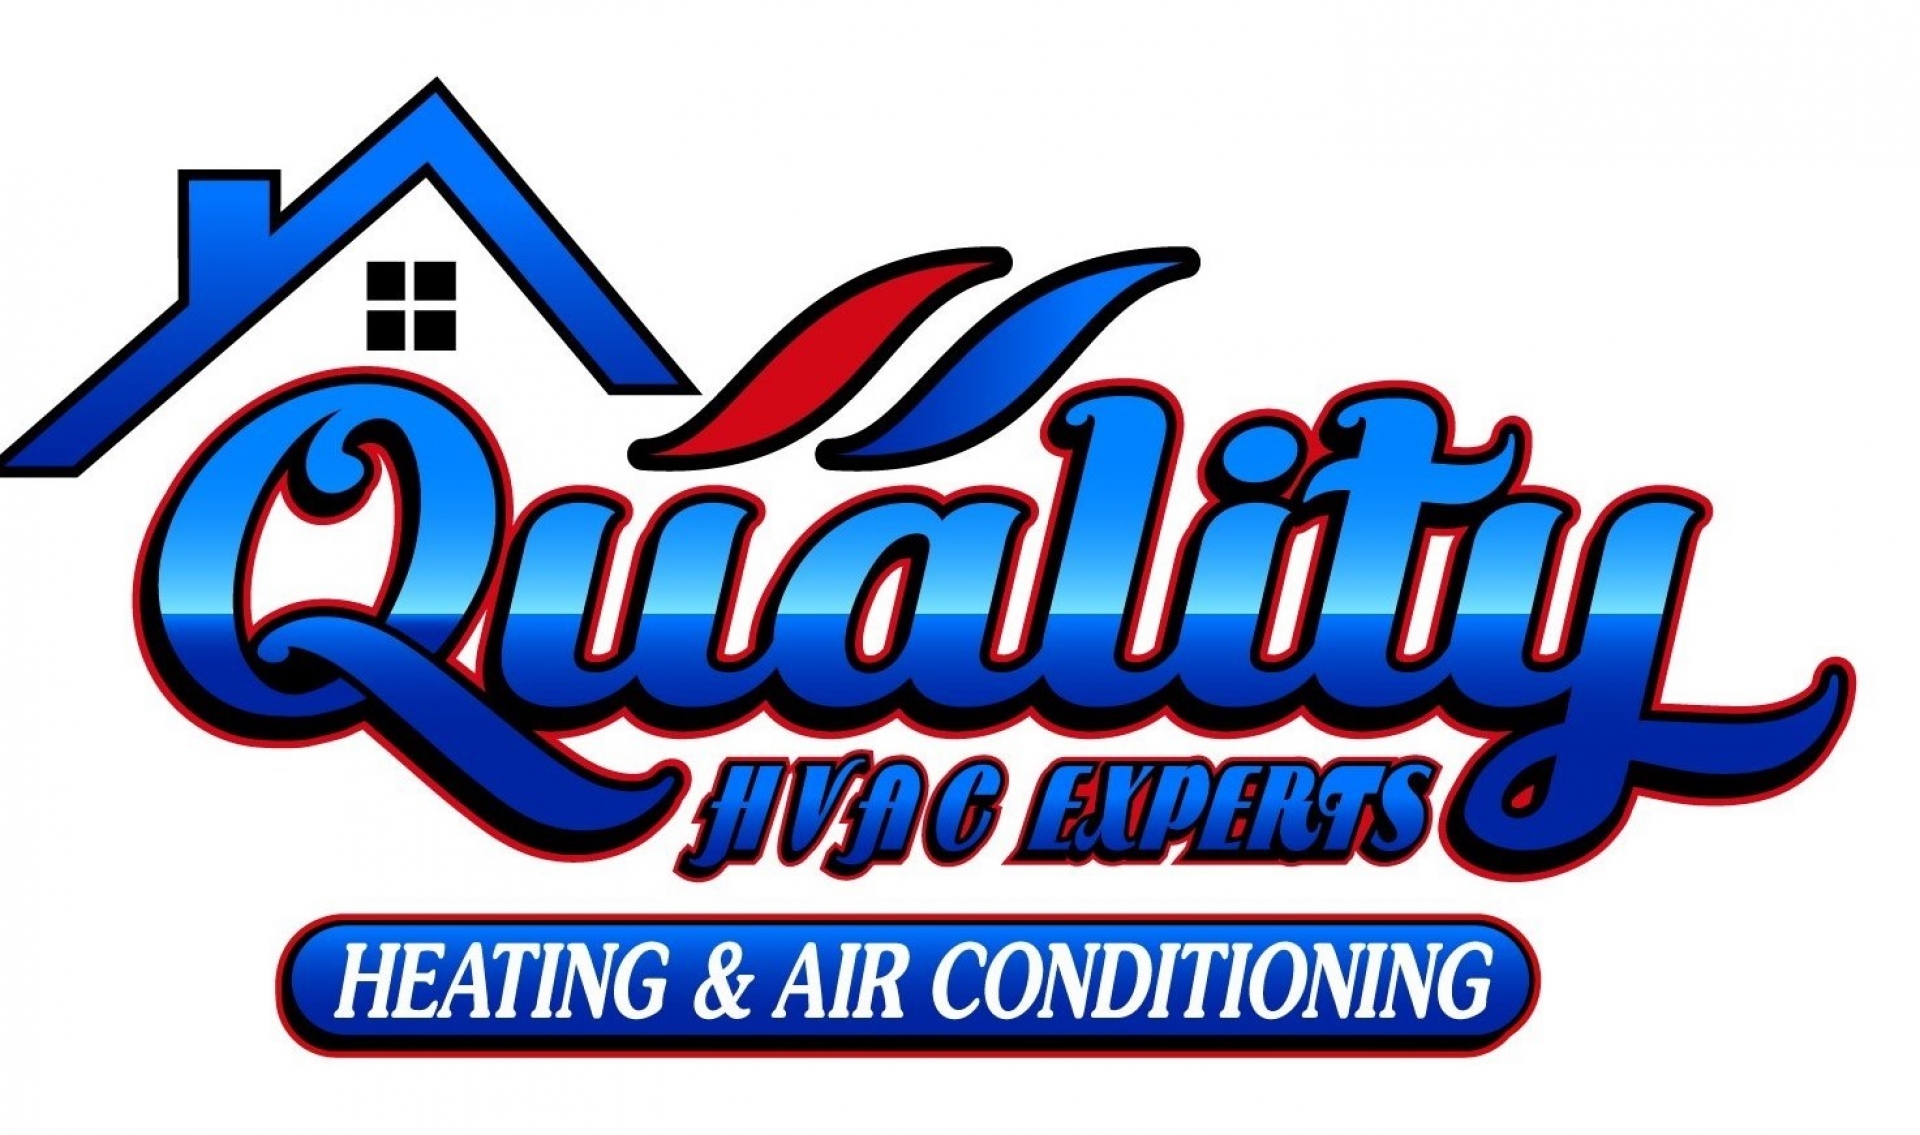 Quality Heating & Air Conditioning company logo